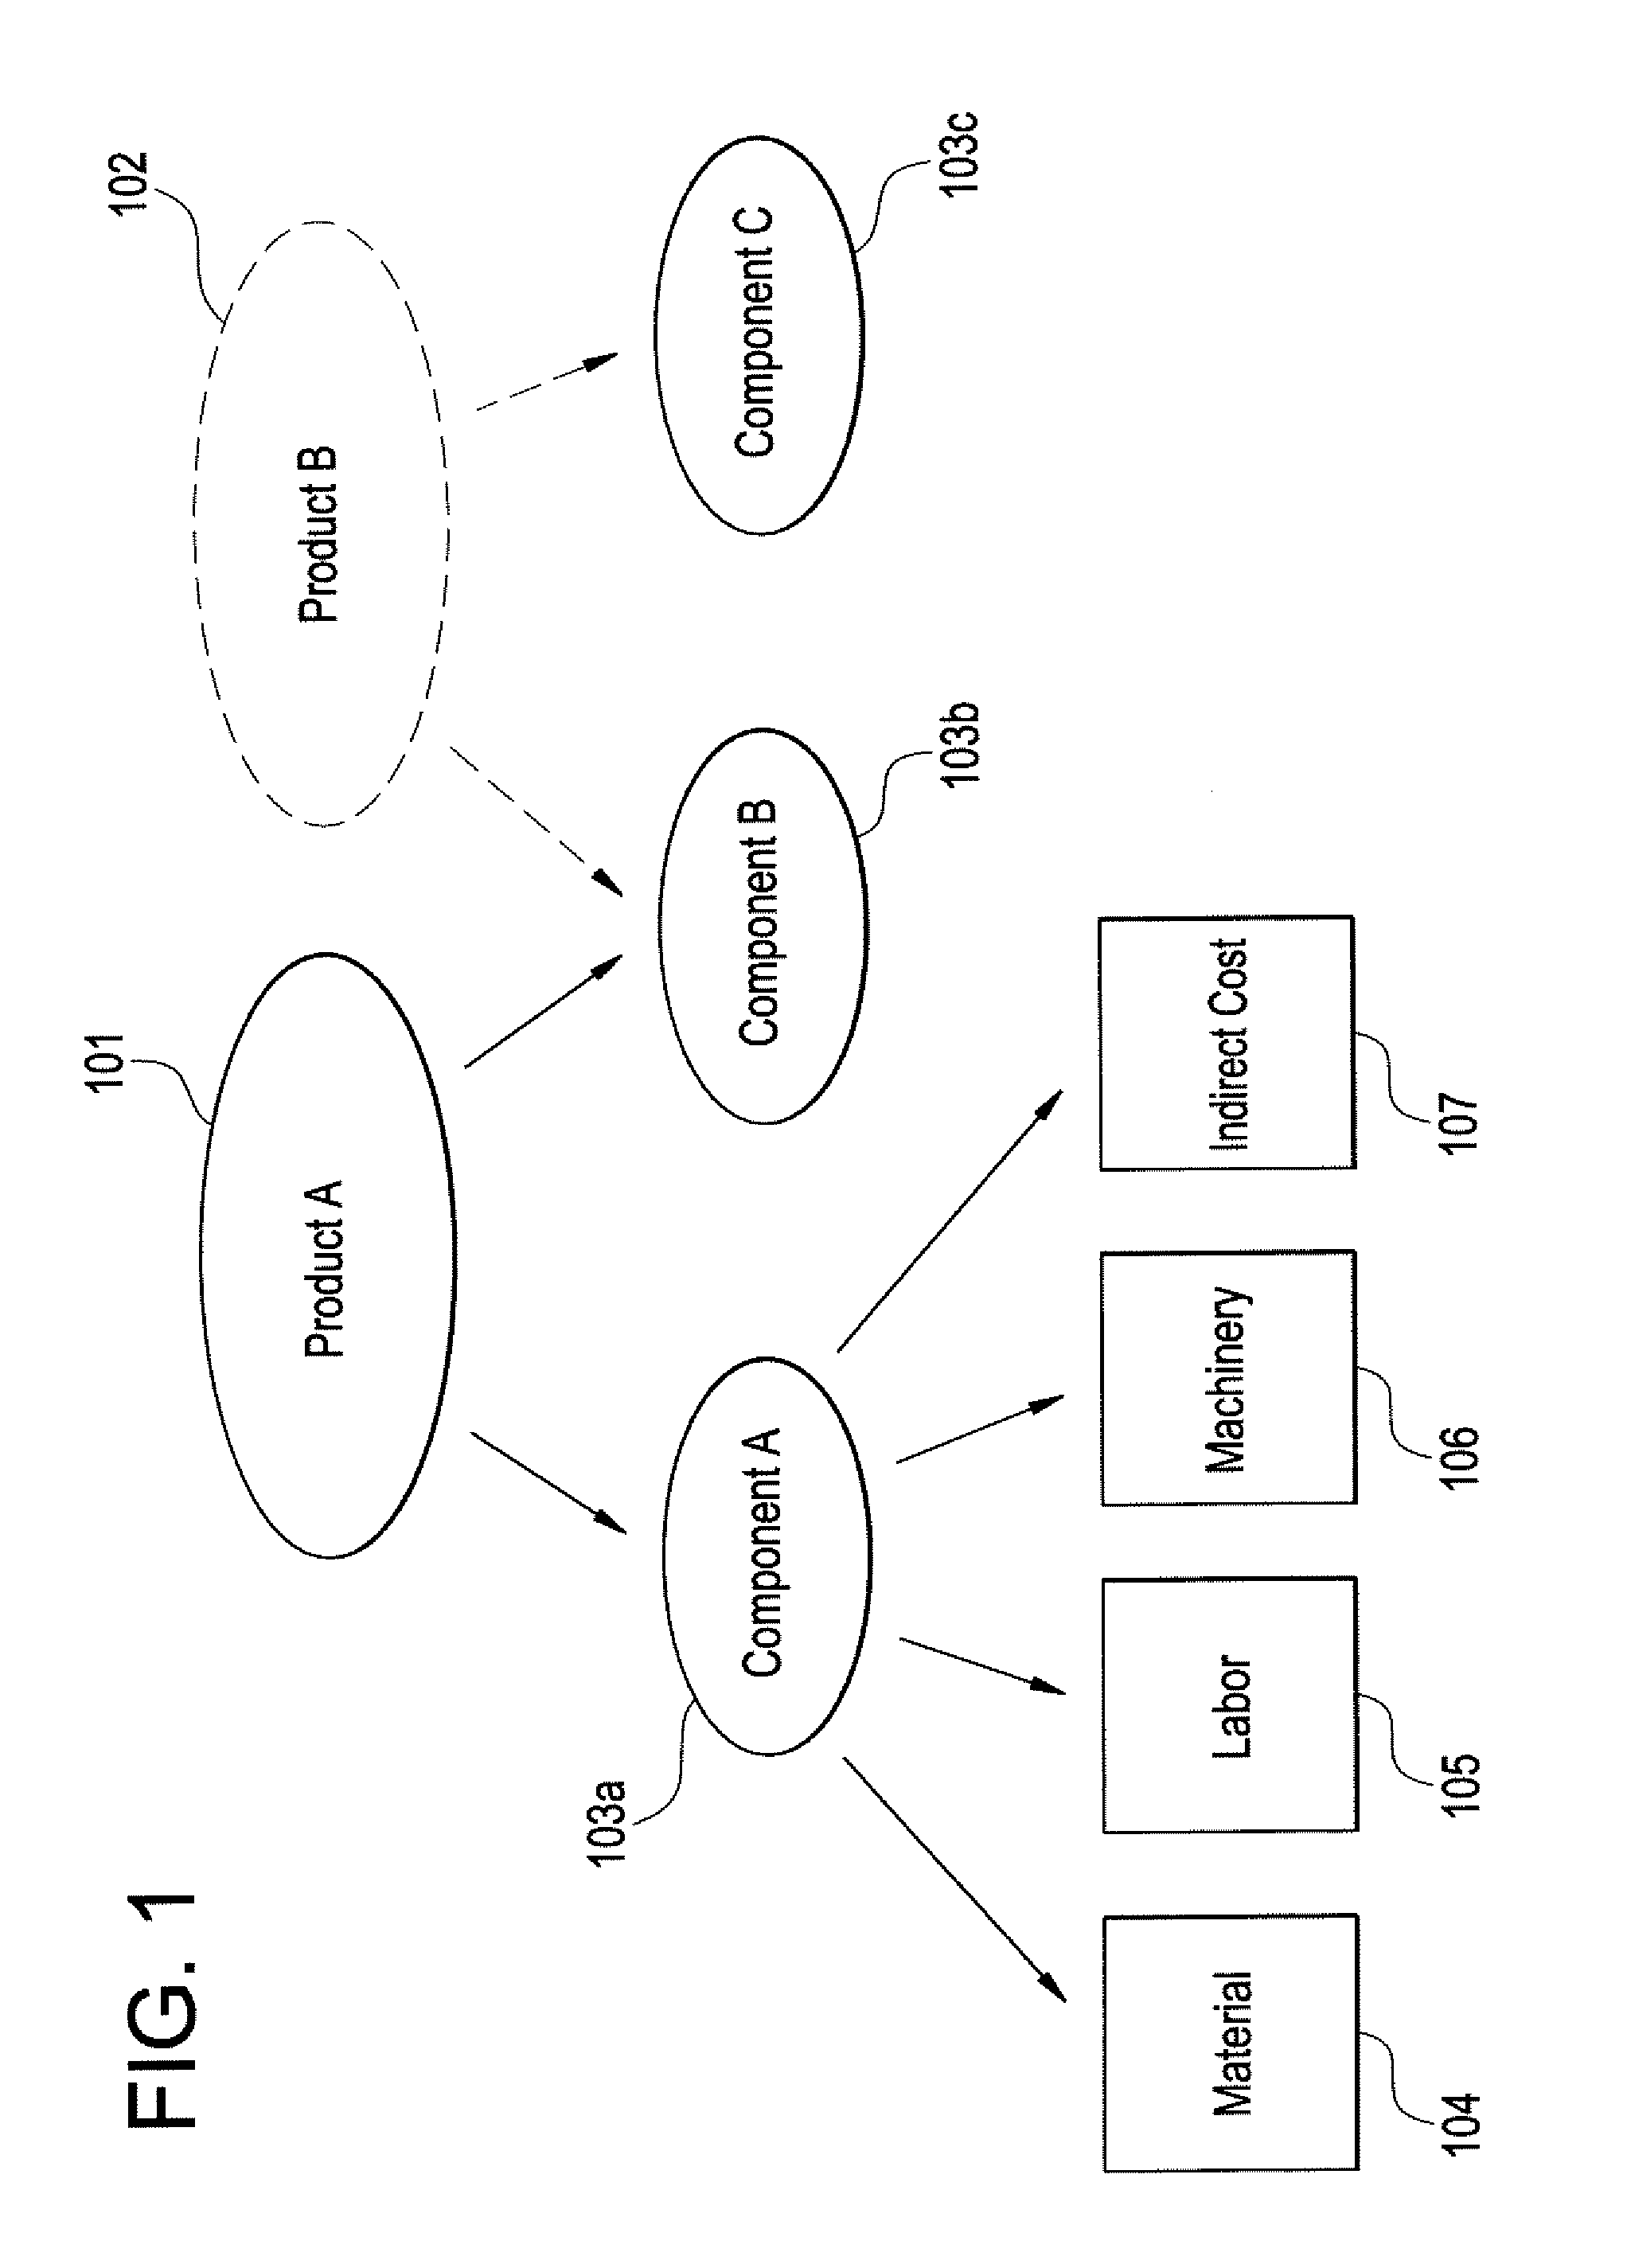 System and method for efficient product assessment